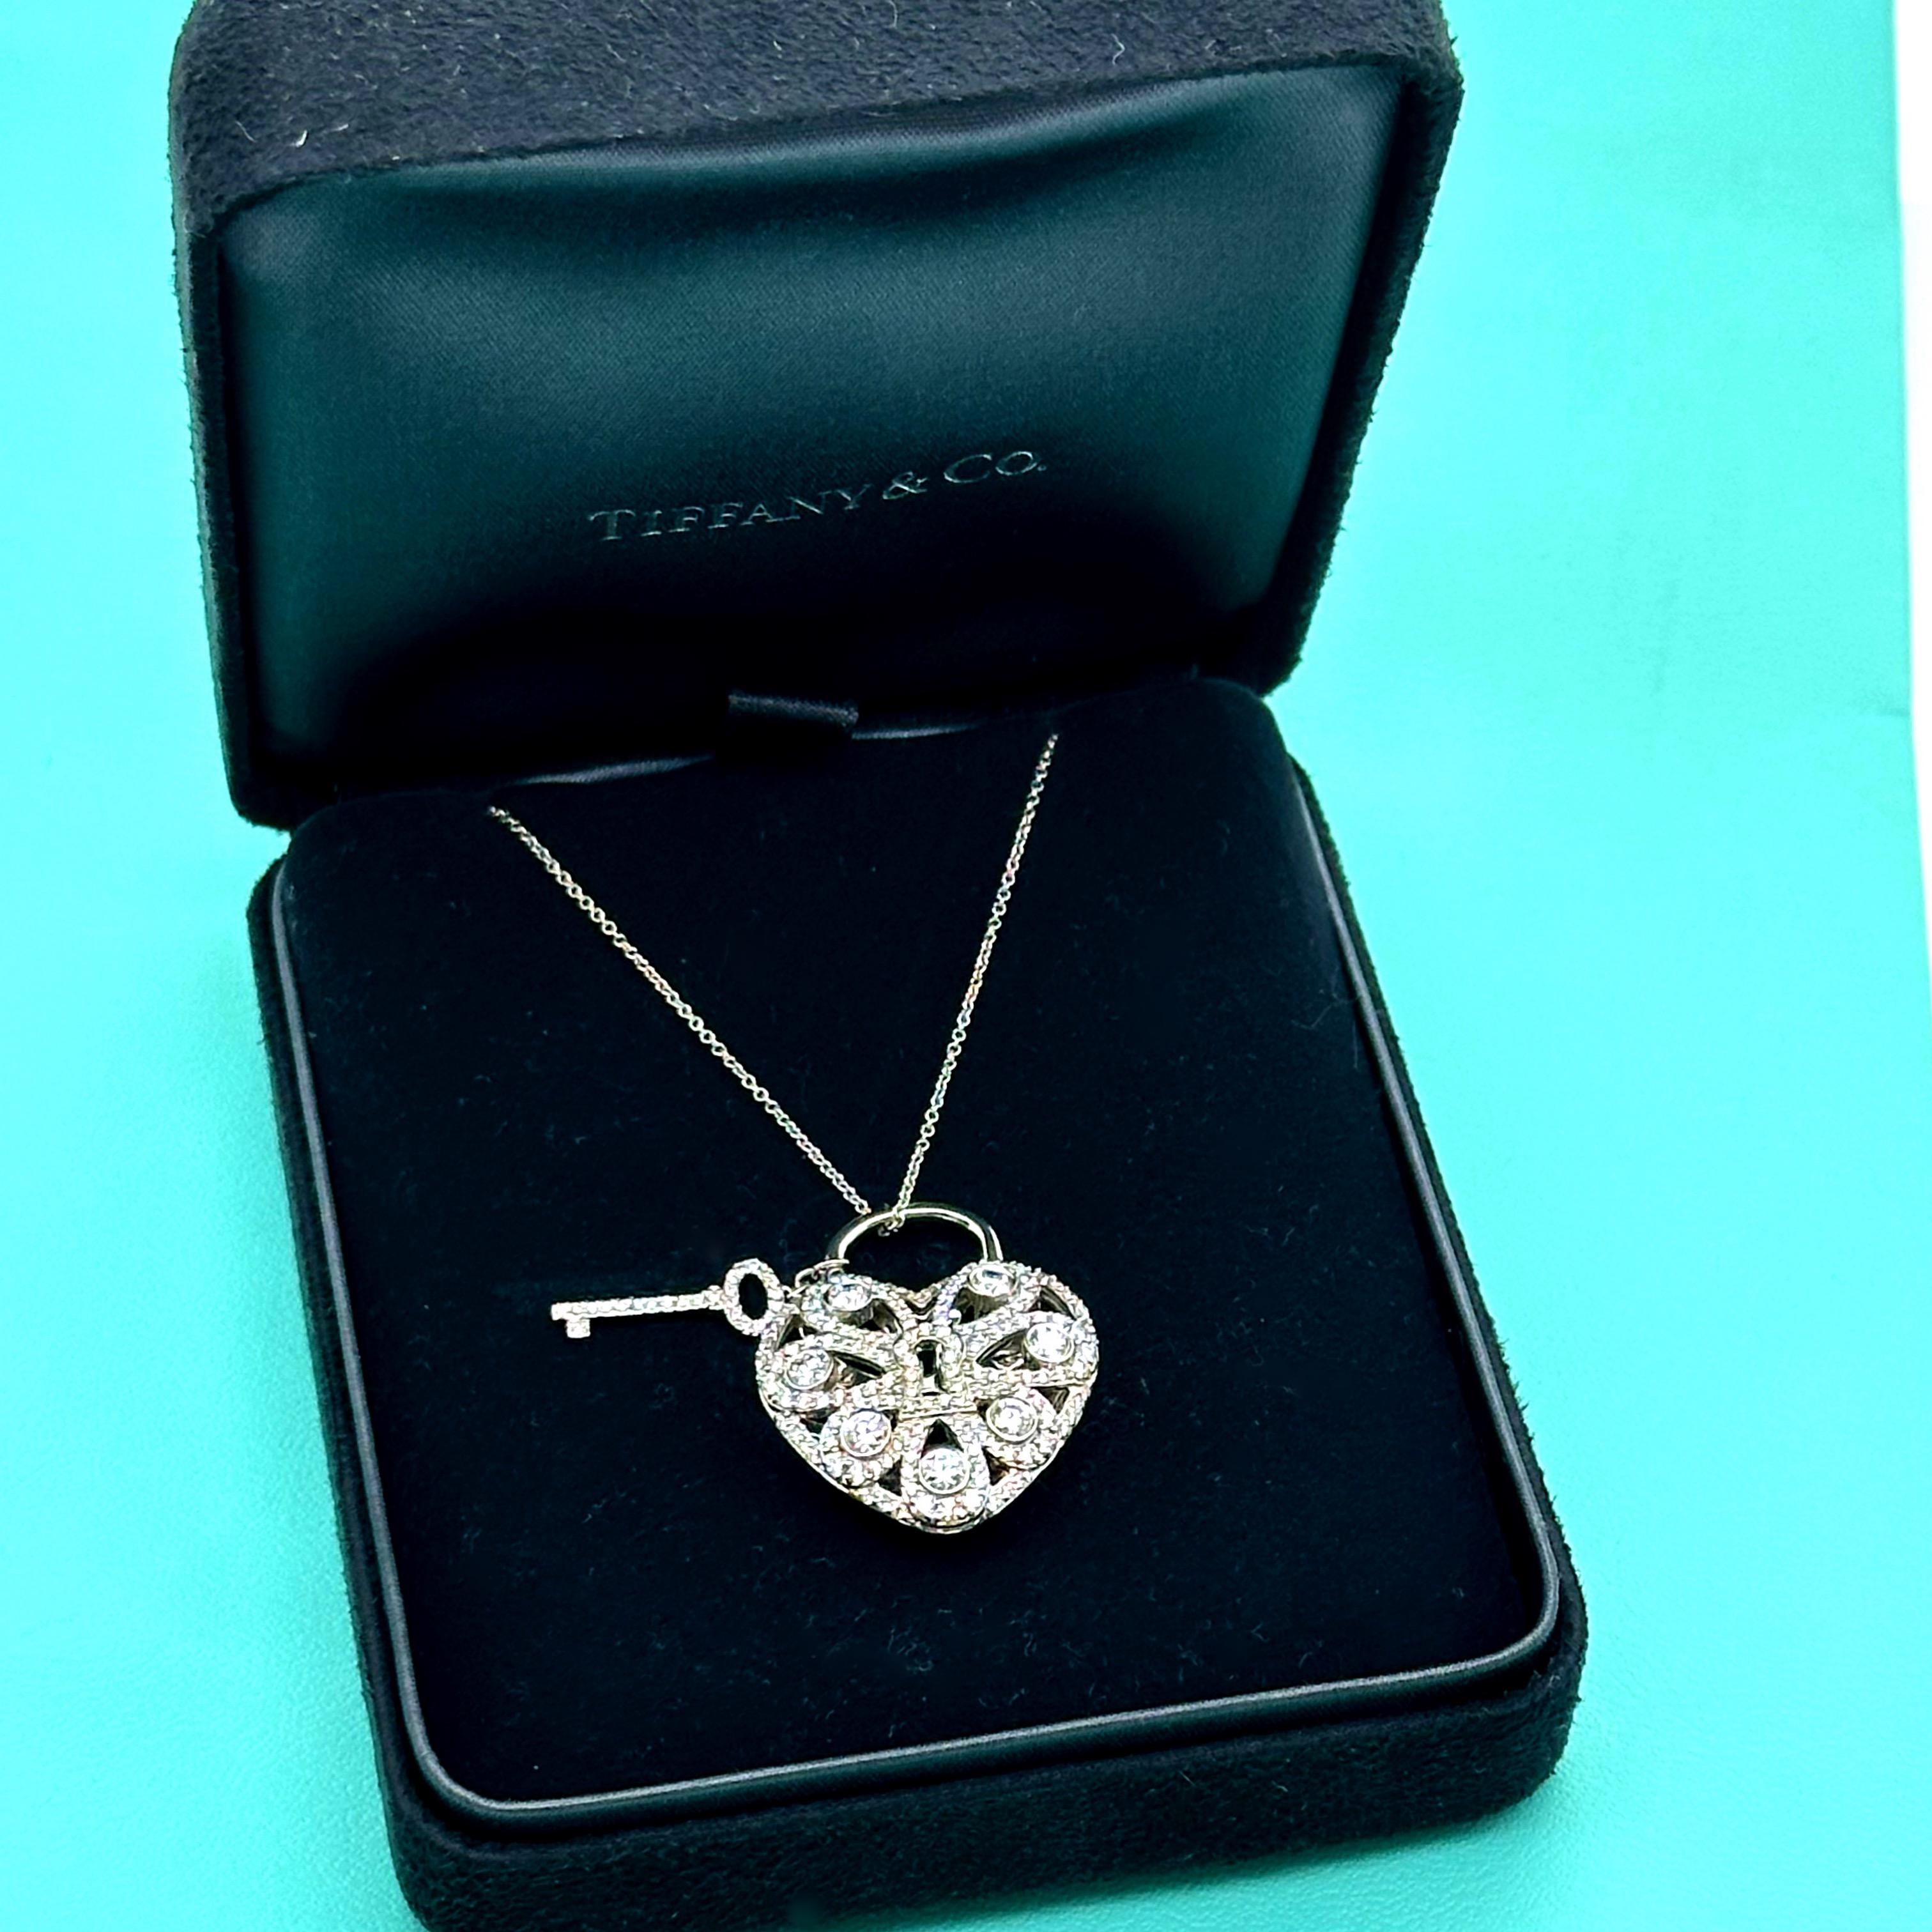 Tiffany & Co. Filigree Heart Key Pendant Necklace
Style:  Pendnat
Metal:   18kt White Gold
Size / Measurements:  18' Inches / Pendant 1 x 1 Inches
TCW:  1.44 tcw
Main Diamond:  ~ 176 Round Brilliant Diamonds
Comments:  Intricate Filigree design on